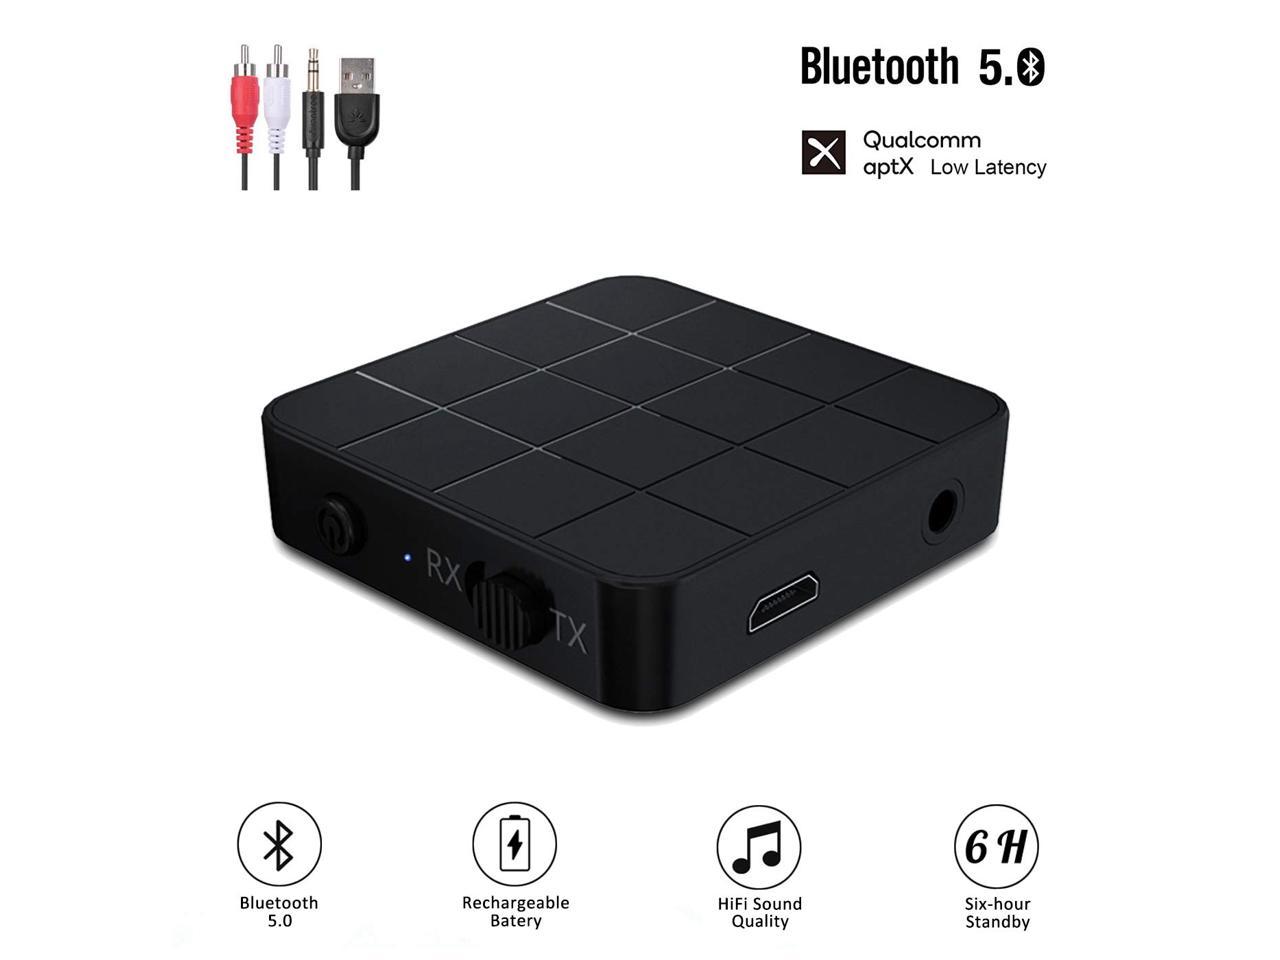 Bluetooth Adapter Audio Bluetooth 4.2 Transmitter Receiver 2 in 1 Transmitter Receivier Free Speech Calls Low Latency with 3.5mm AUX Cable for TV PC Headphones Aircraft Loudspeaker Music System 